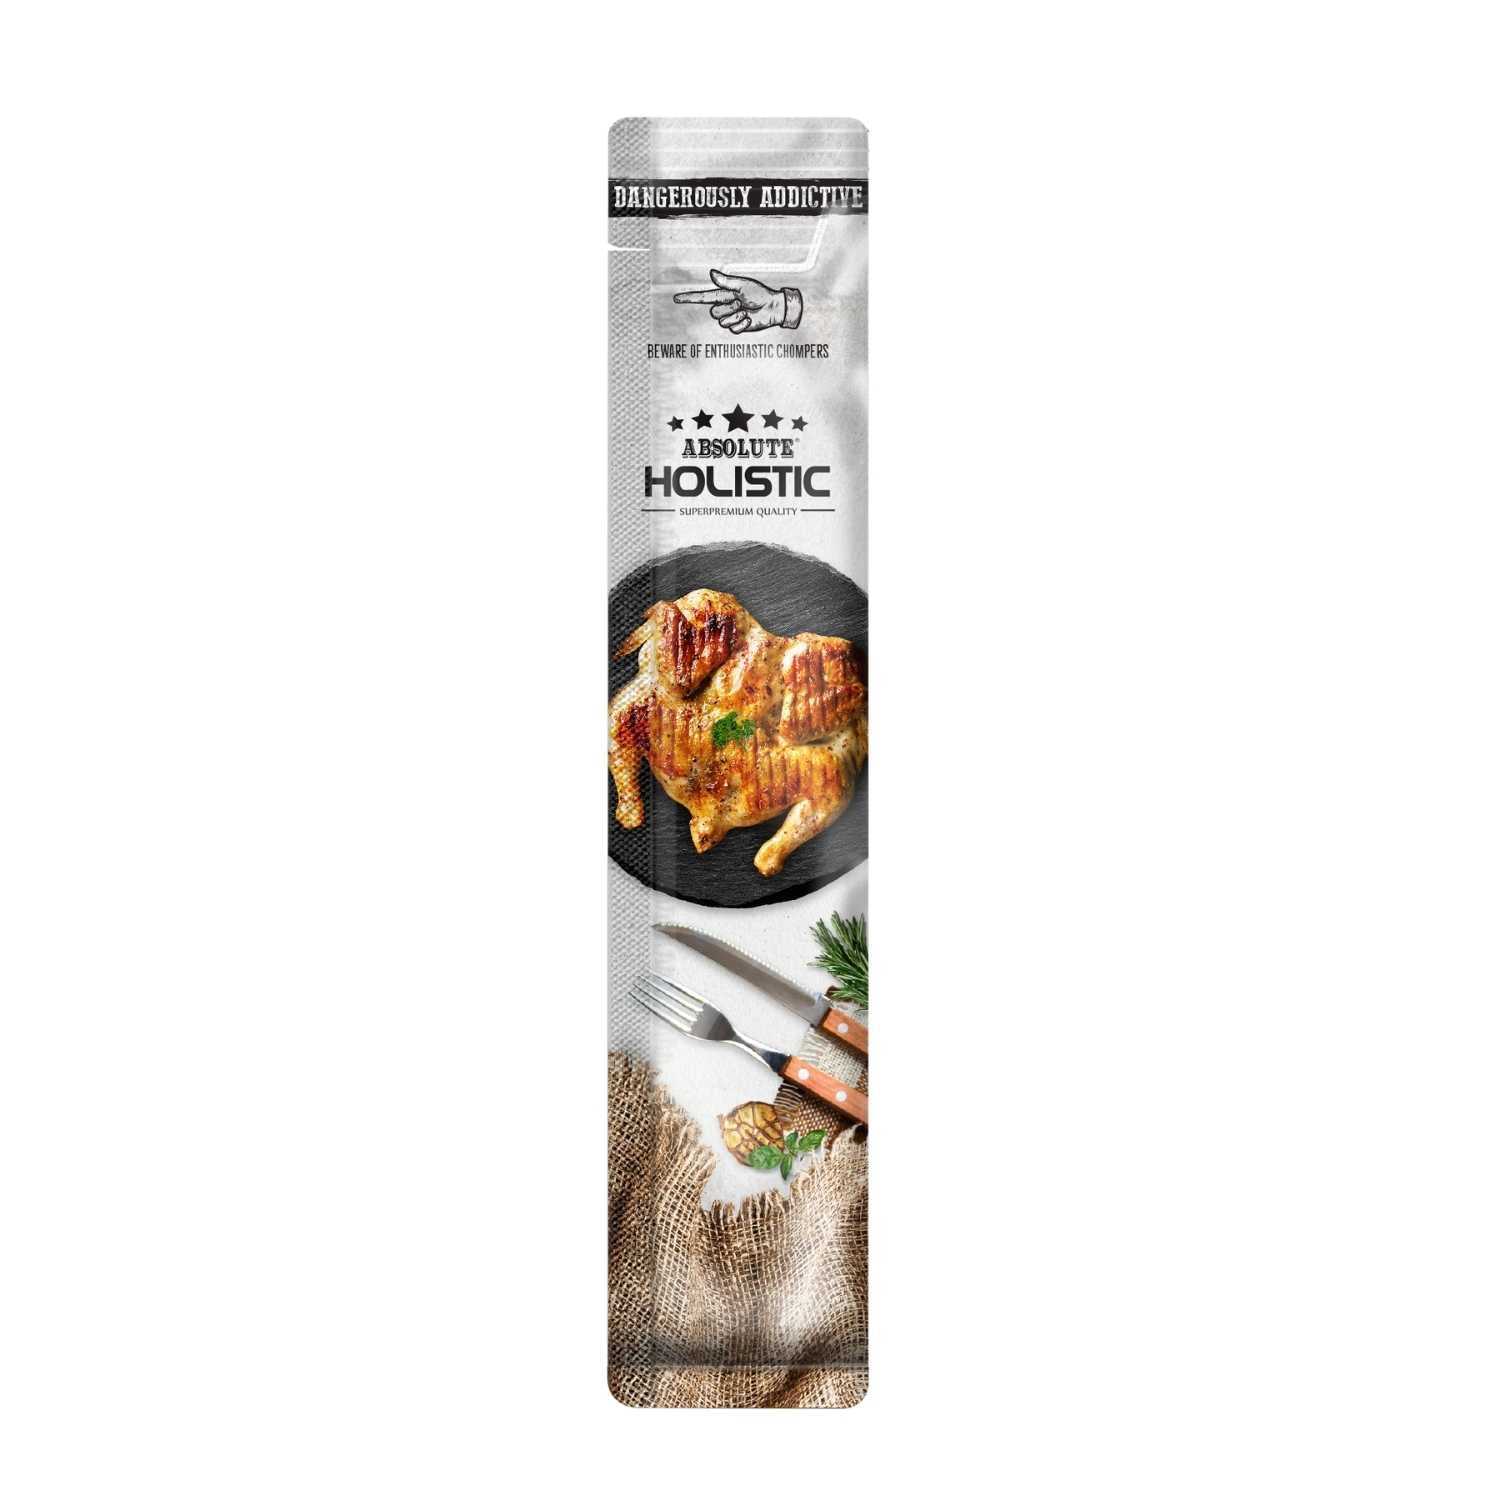 Absolute Holistic - Salmon Bisque (chicken & salmon) - Dog & Cat 5x12g Treats